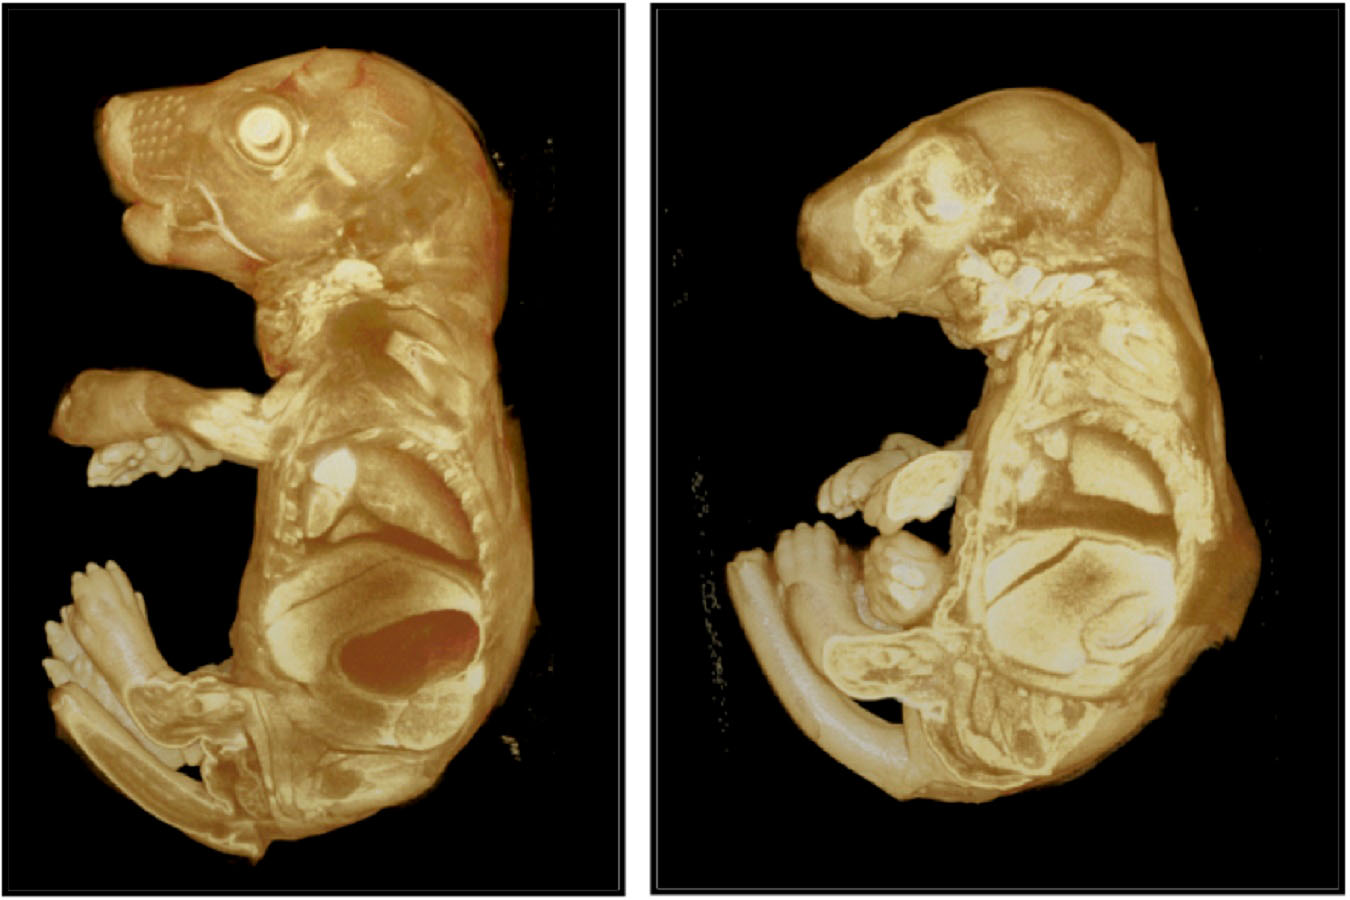 Micro-CT analysis of a normal mouse embryo and a mutant with renal aplasia